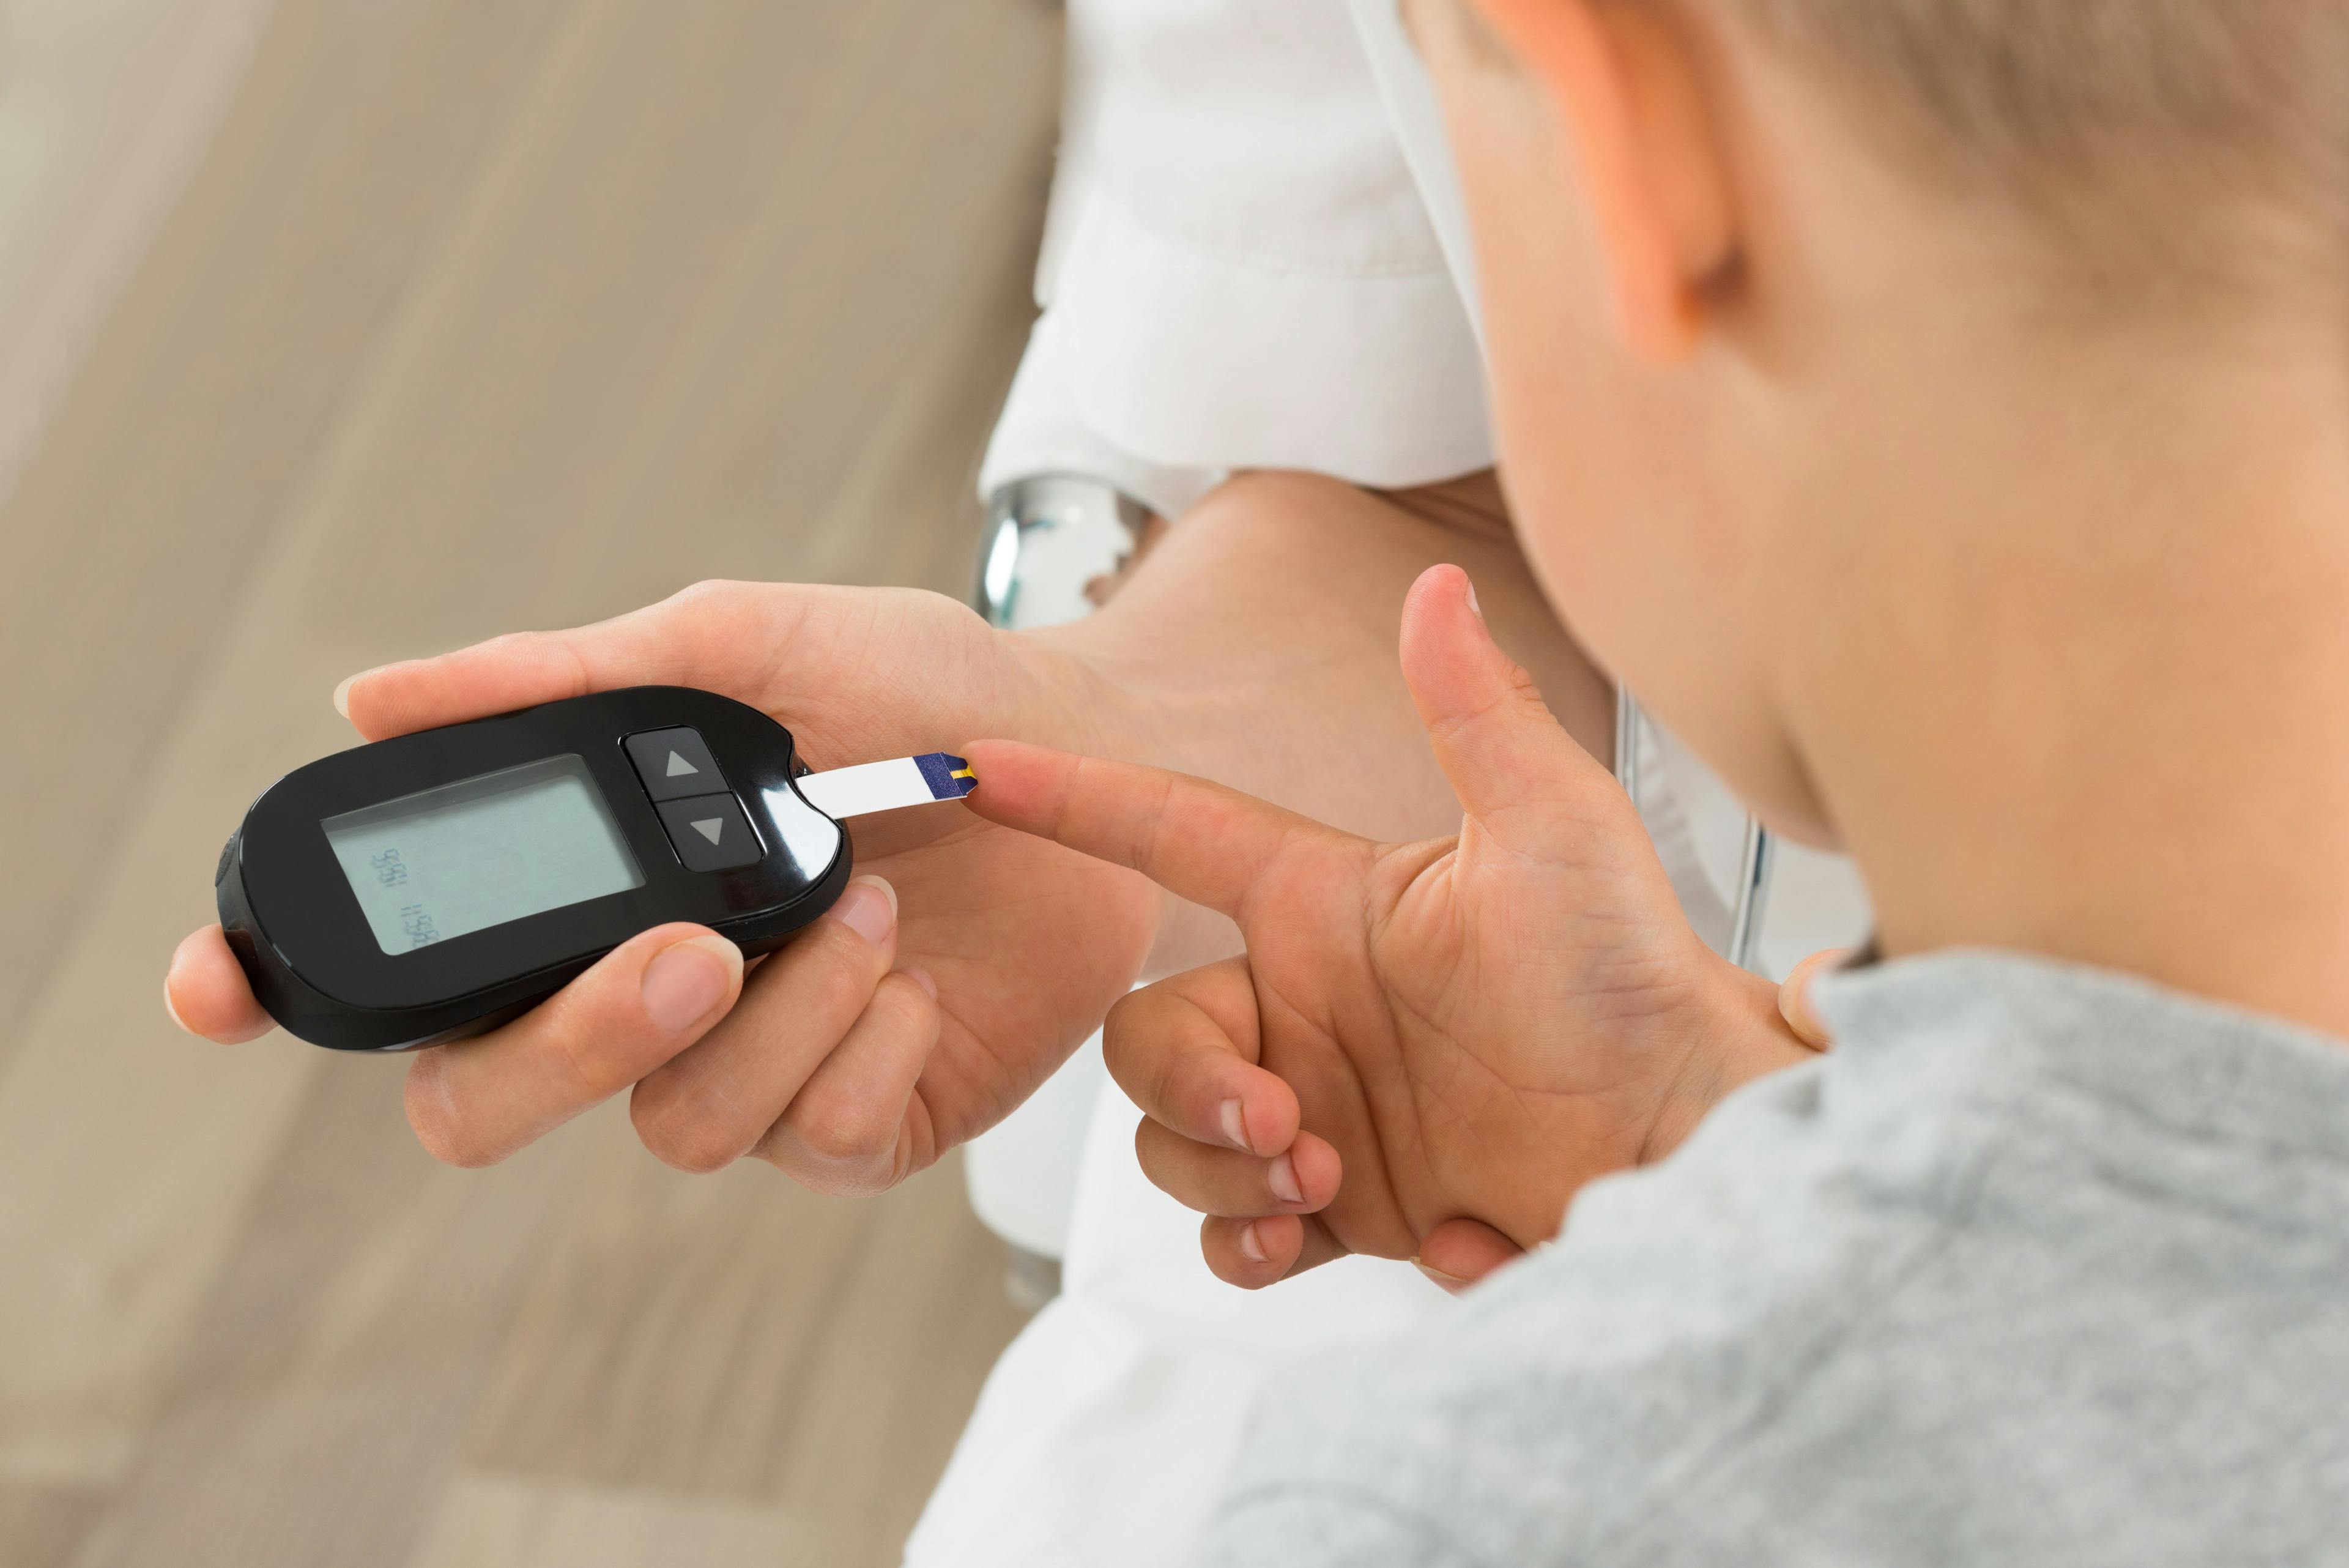 HbA1c Over 6% Associated With Higher Diabetes Risk in Adolescents